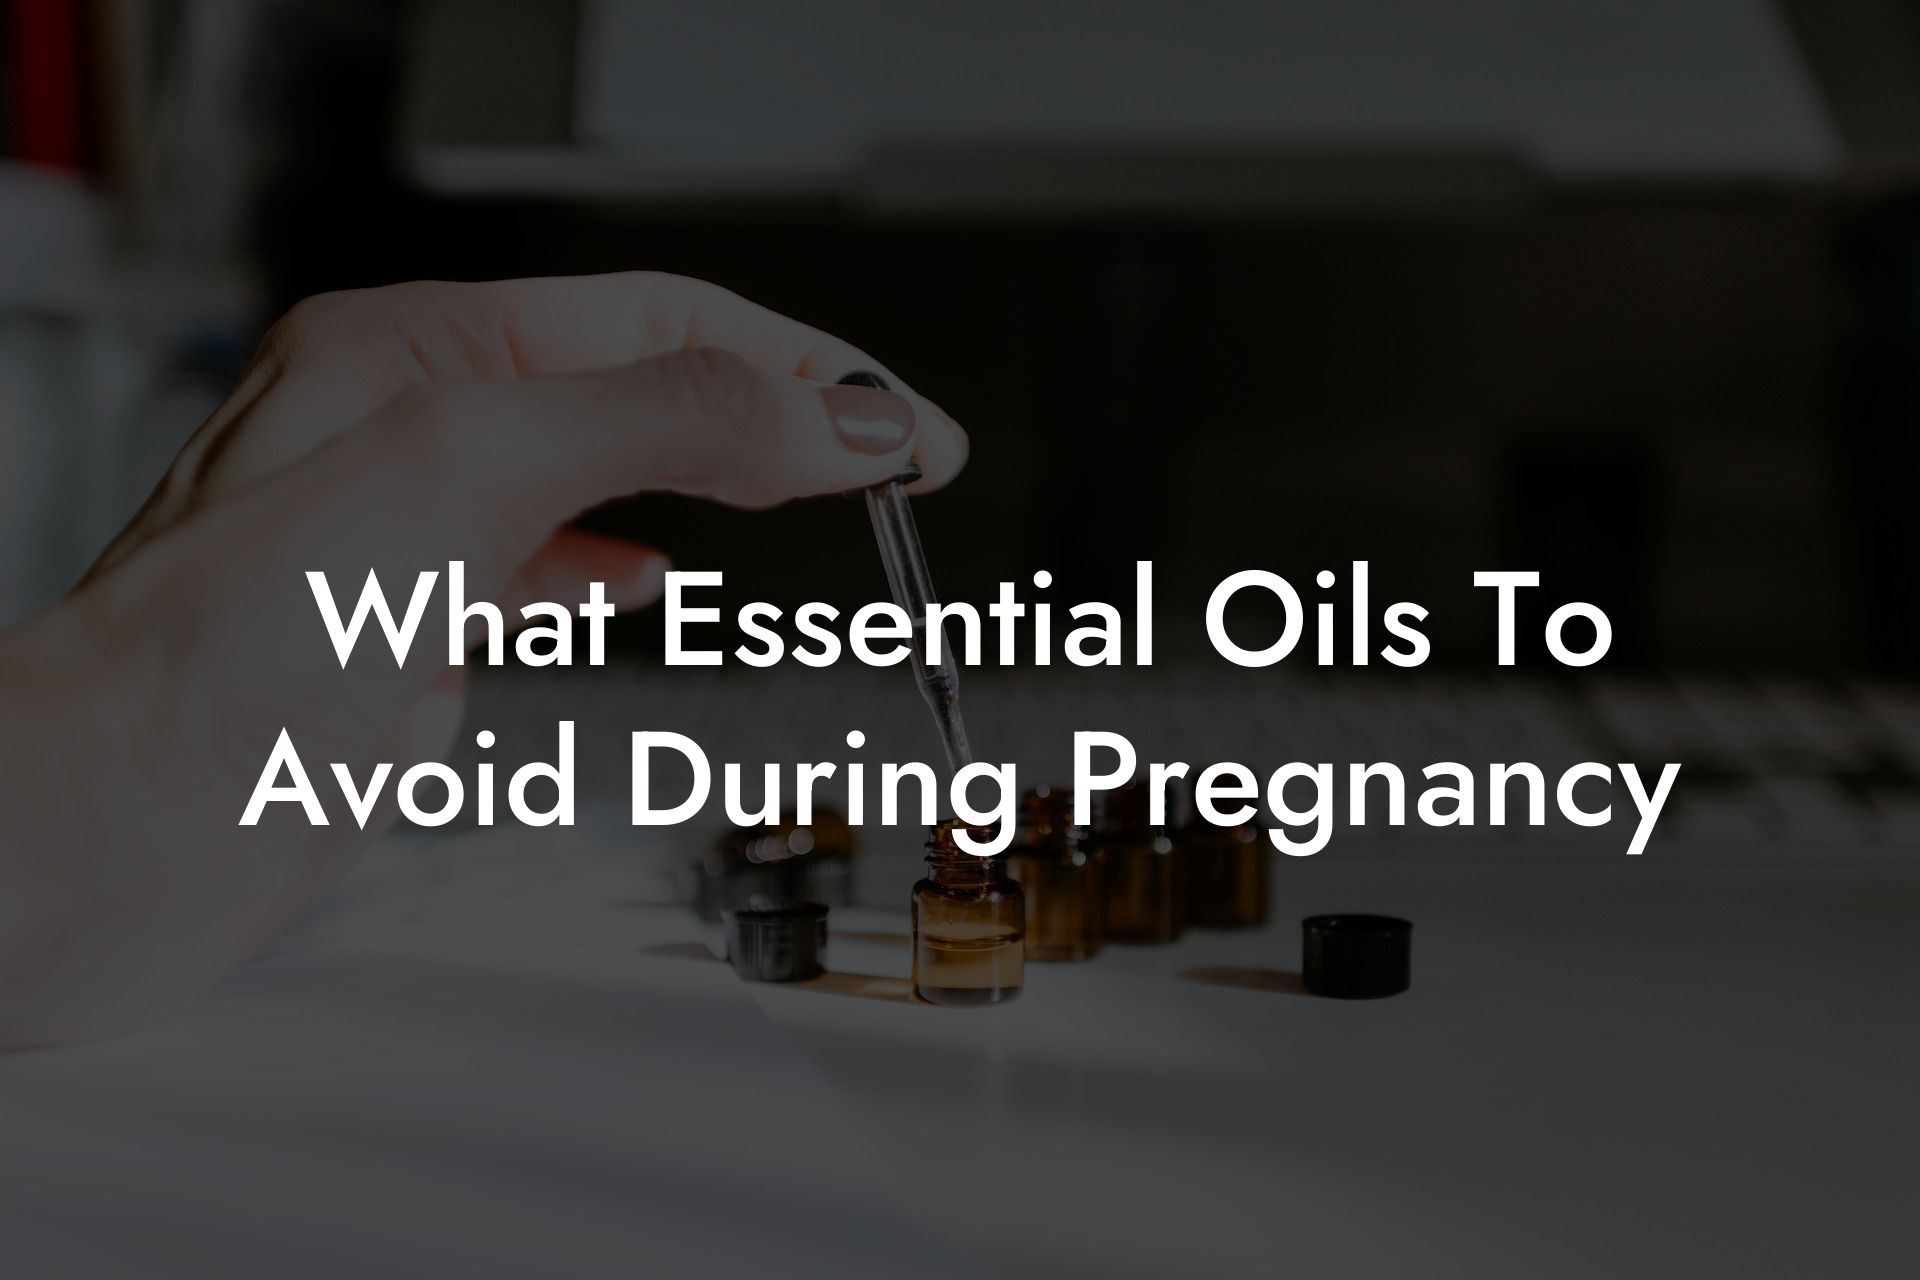 What Essential Oils To Avoid During Pregnancy